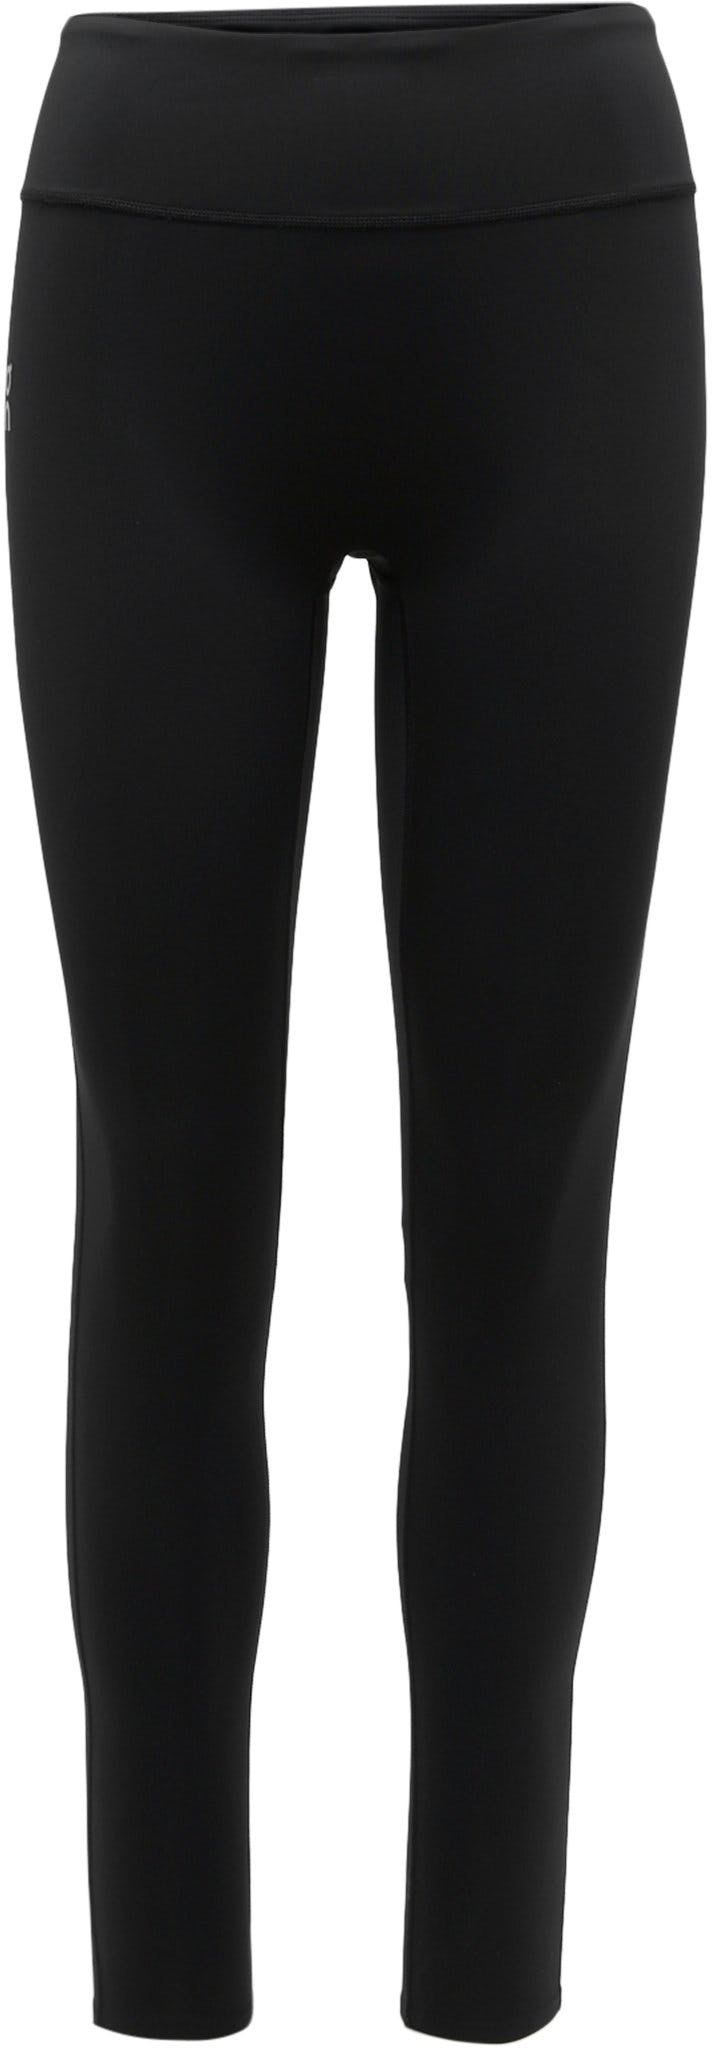 Product image for Core Tights - Women's